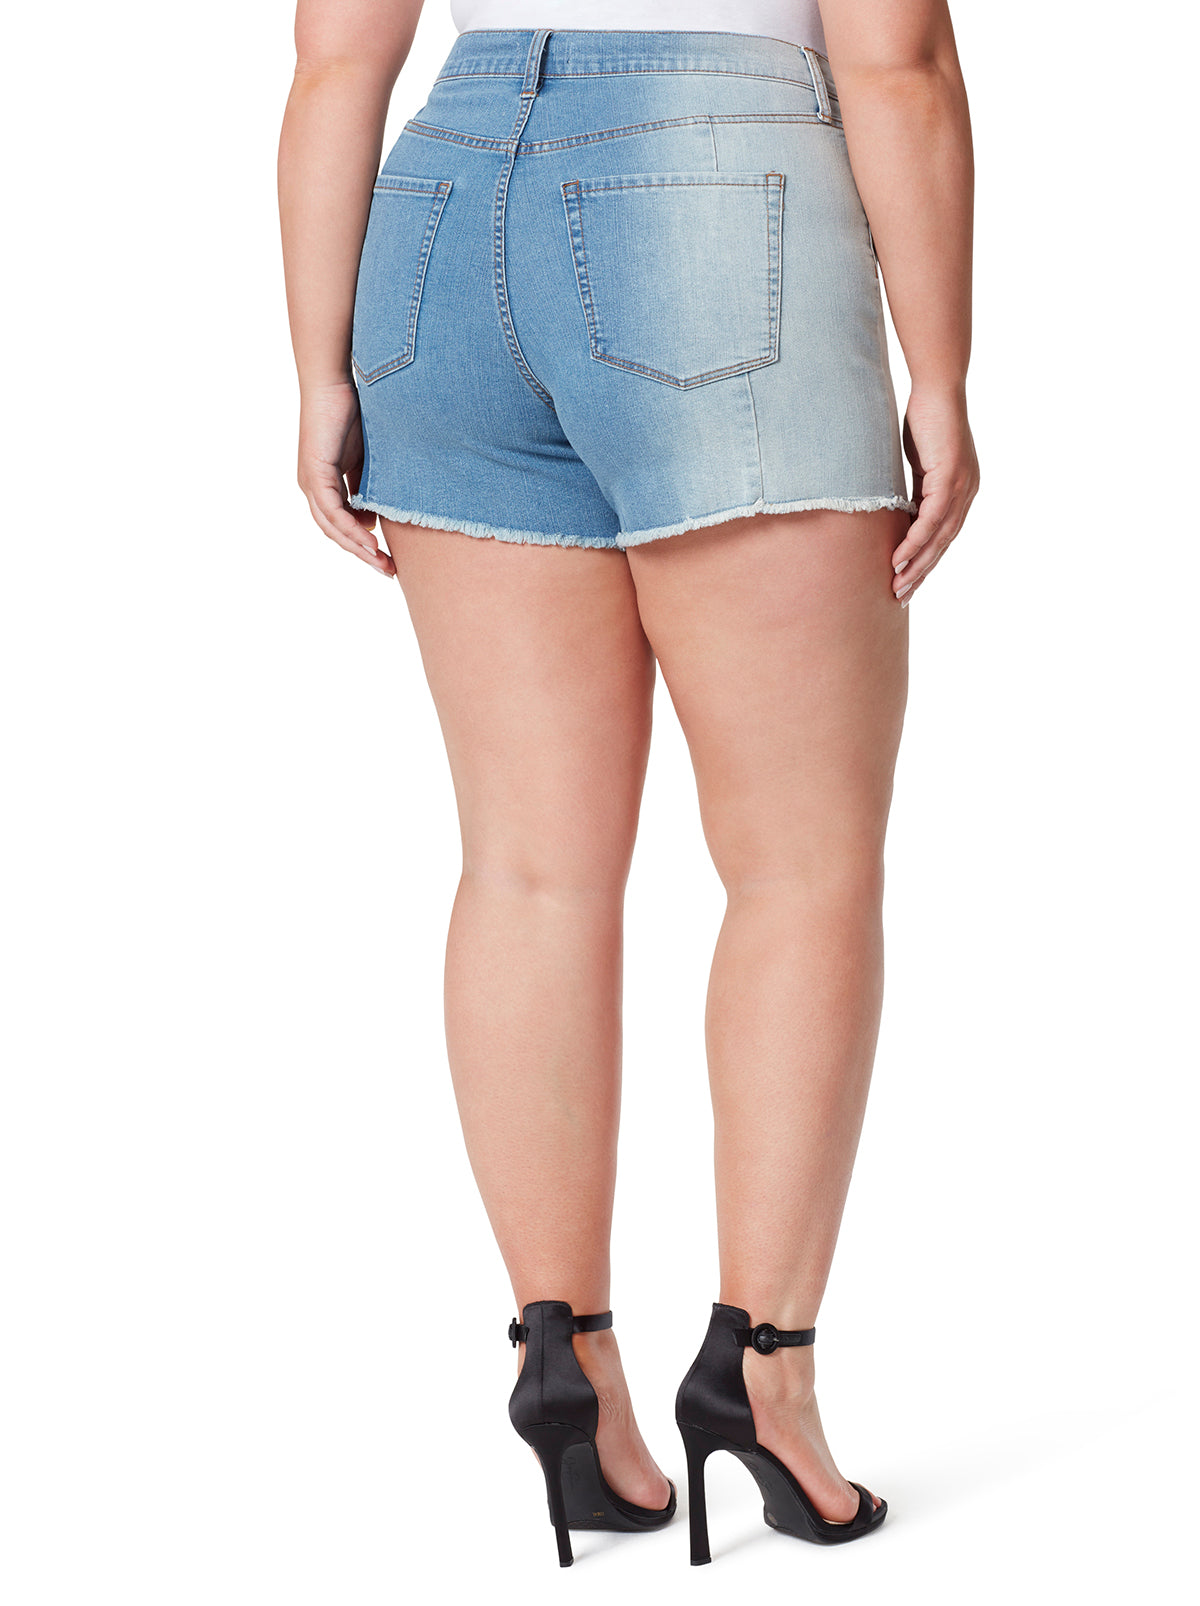 Infinite High Waist Short in Born to Fly – Jessica Simpson